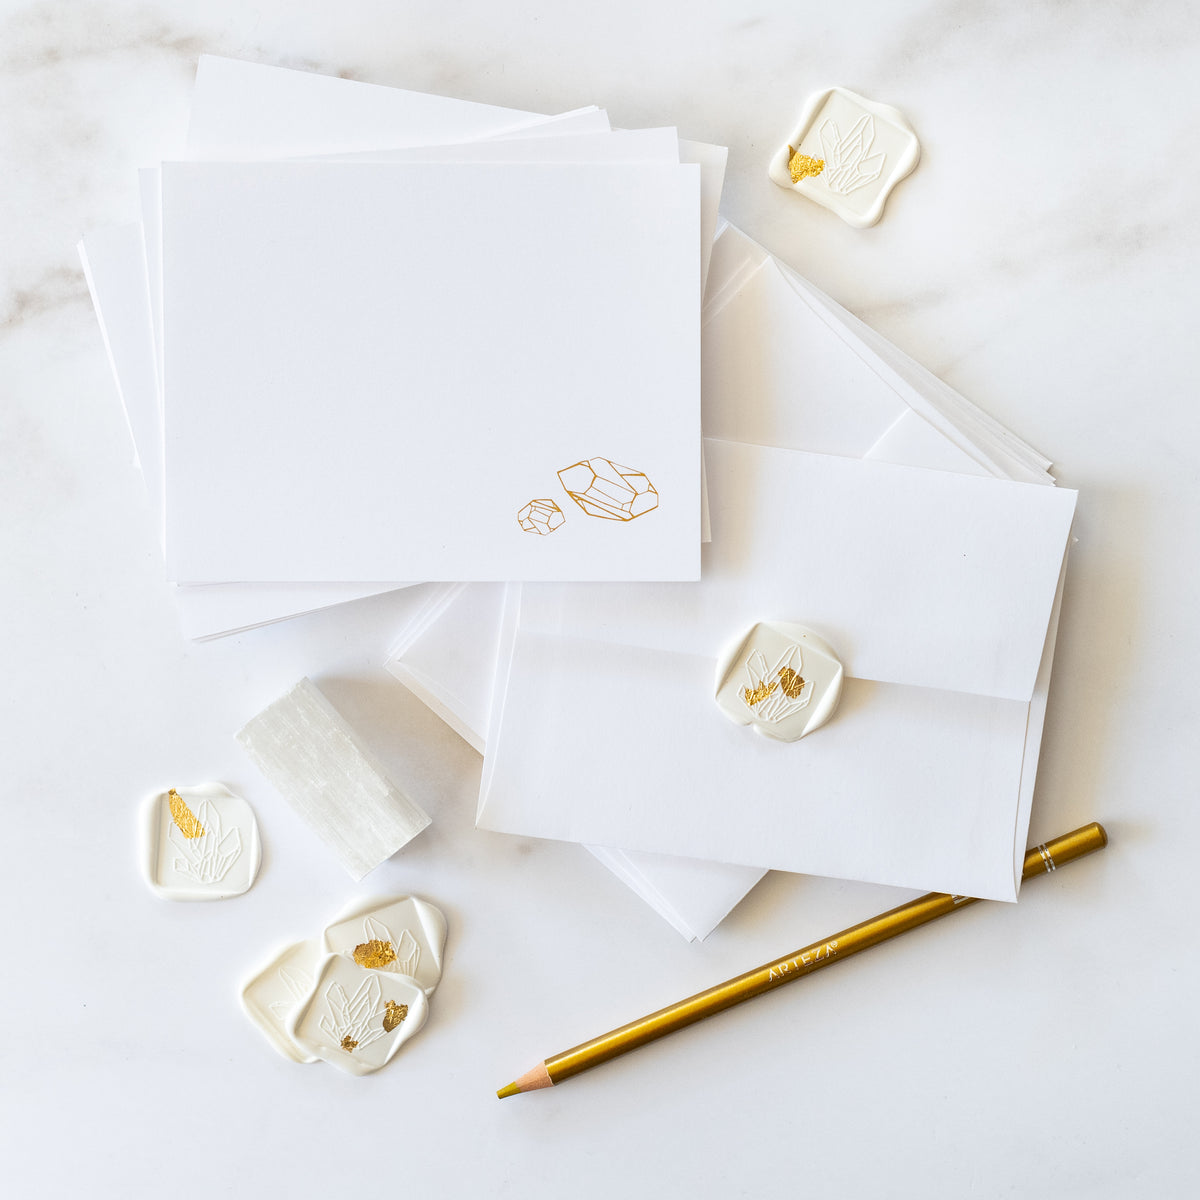 Our &quot;Gemstone&quot; flat note stationery set includes a set of 6 foil printed cards and envelopes with 6 professional grade, self adhesive wax seals.